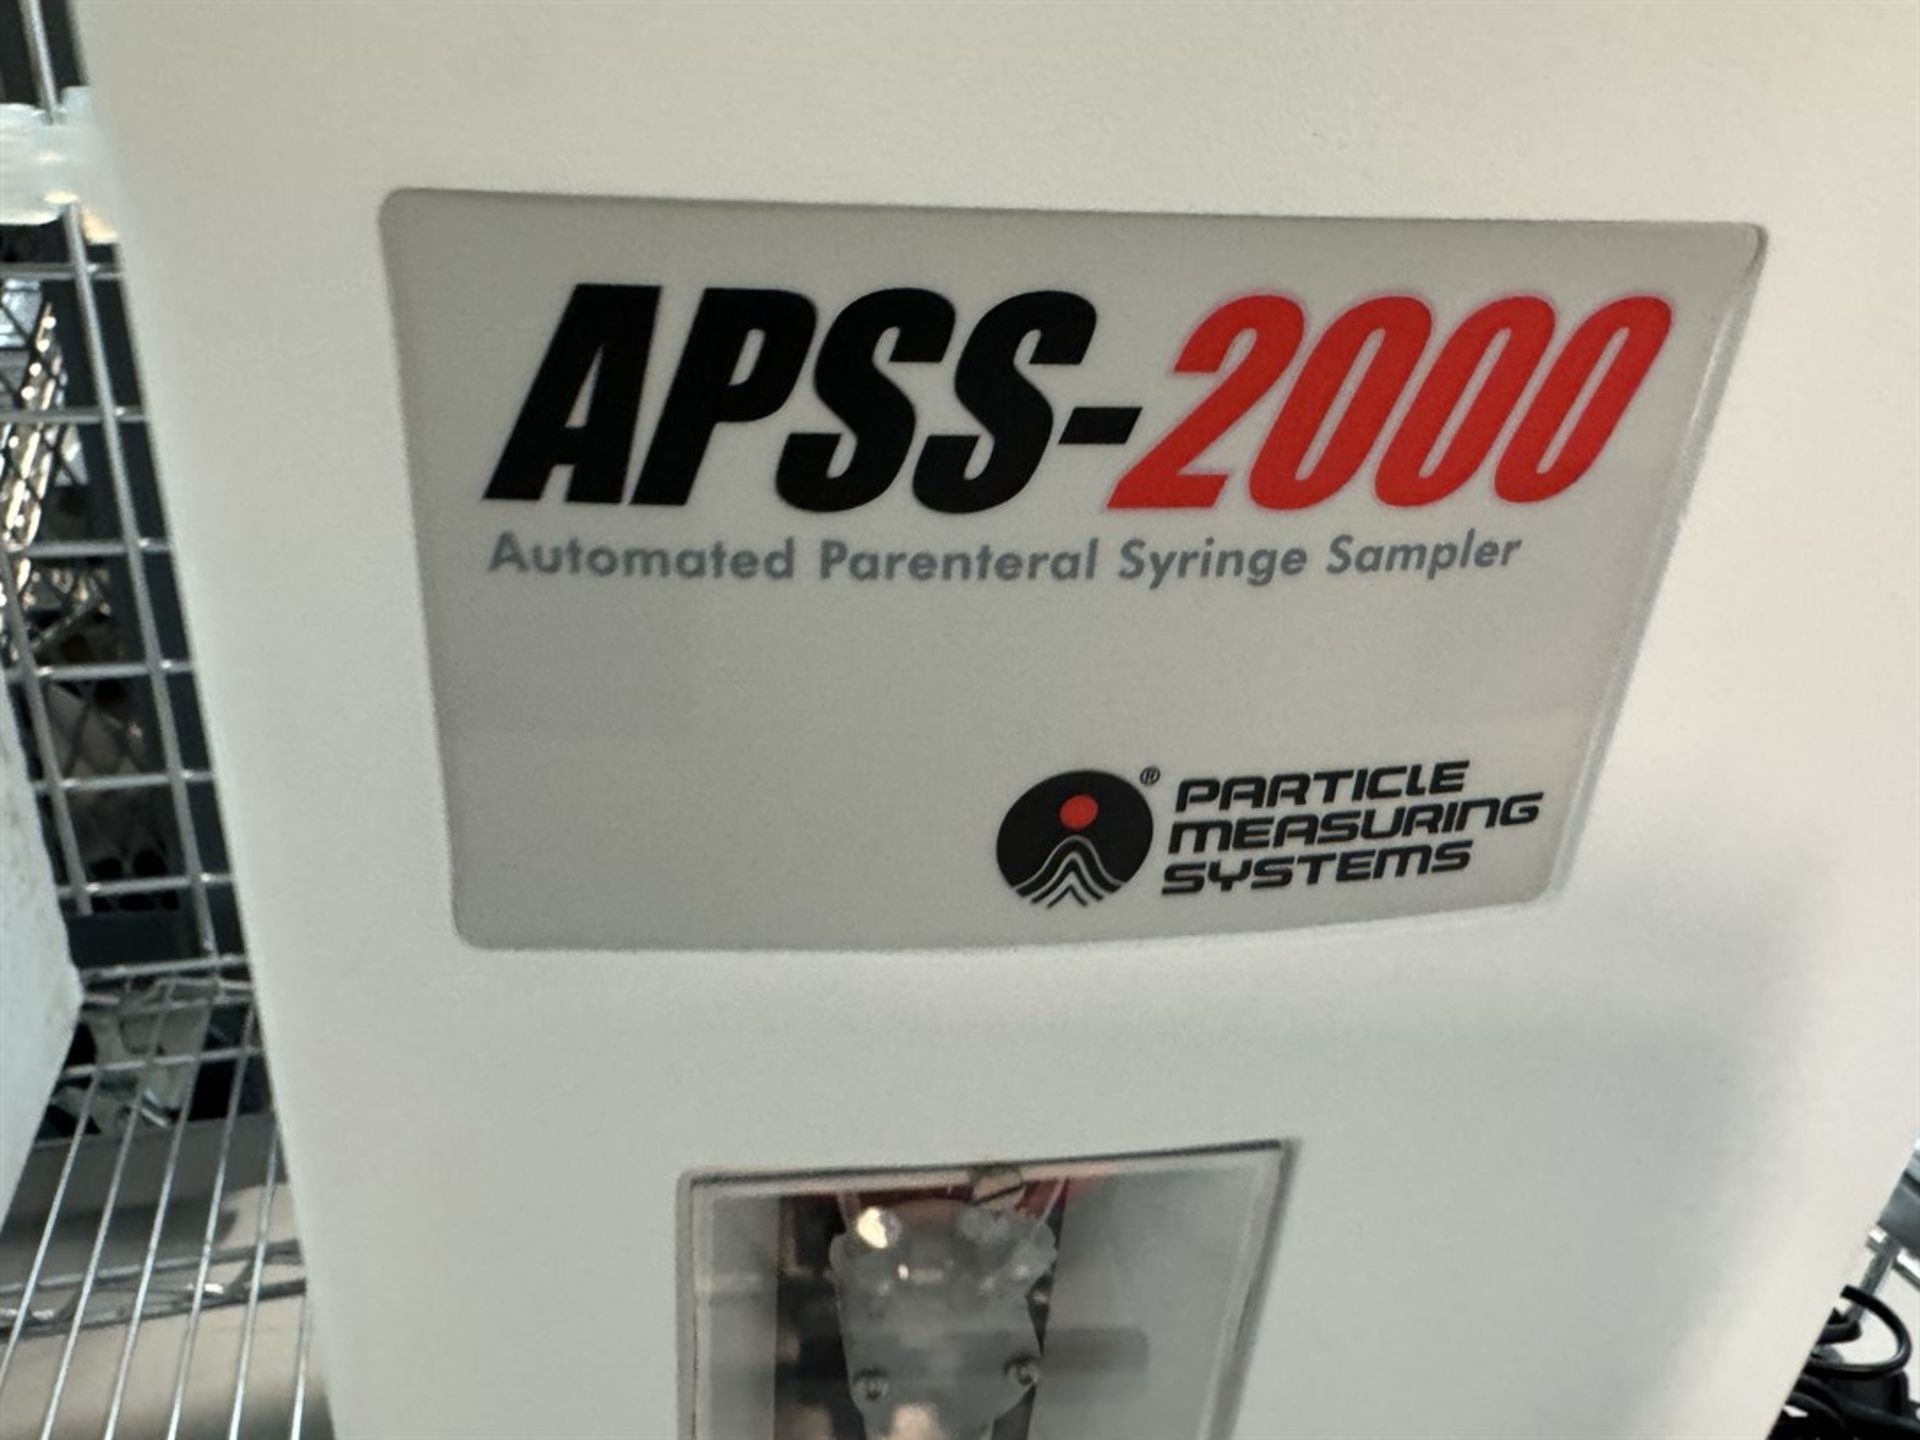 PARTICLE MEASURING SYSTEMS APSS-2000 Automated Parenteral Syringe Sampler, s/n 98228 - Image 4 of 5